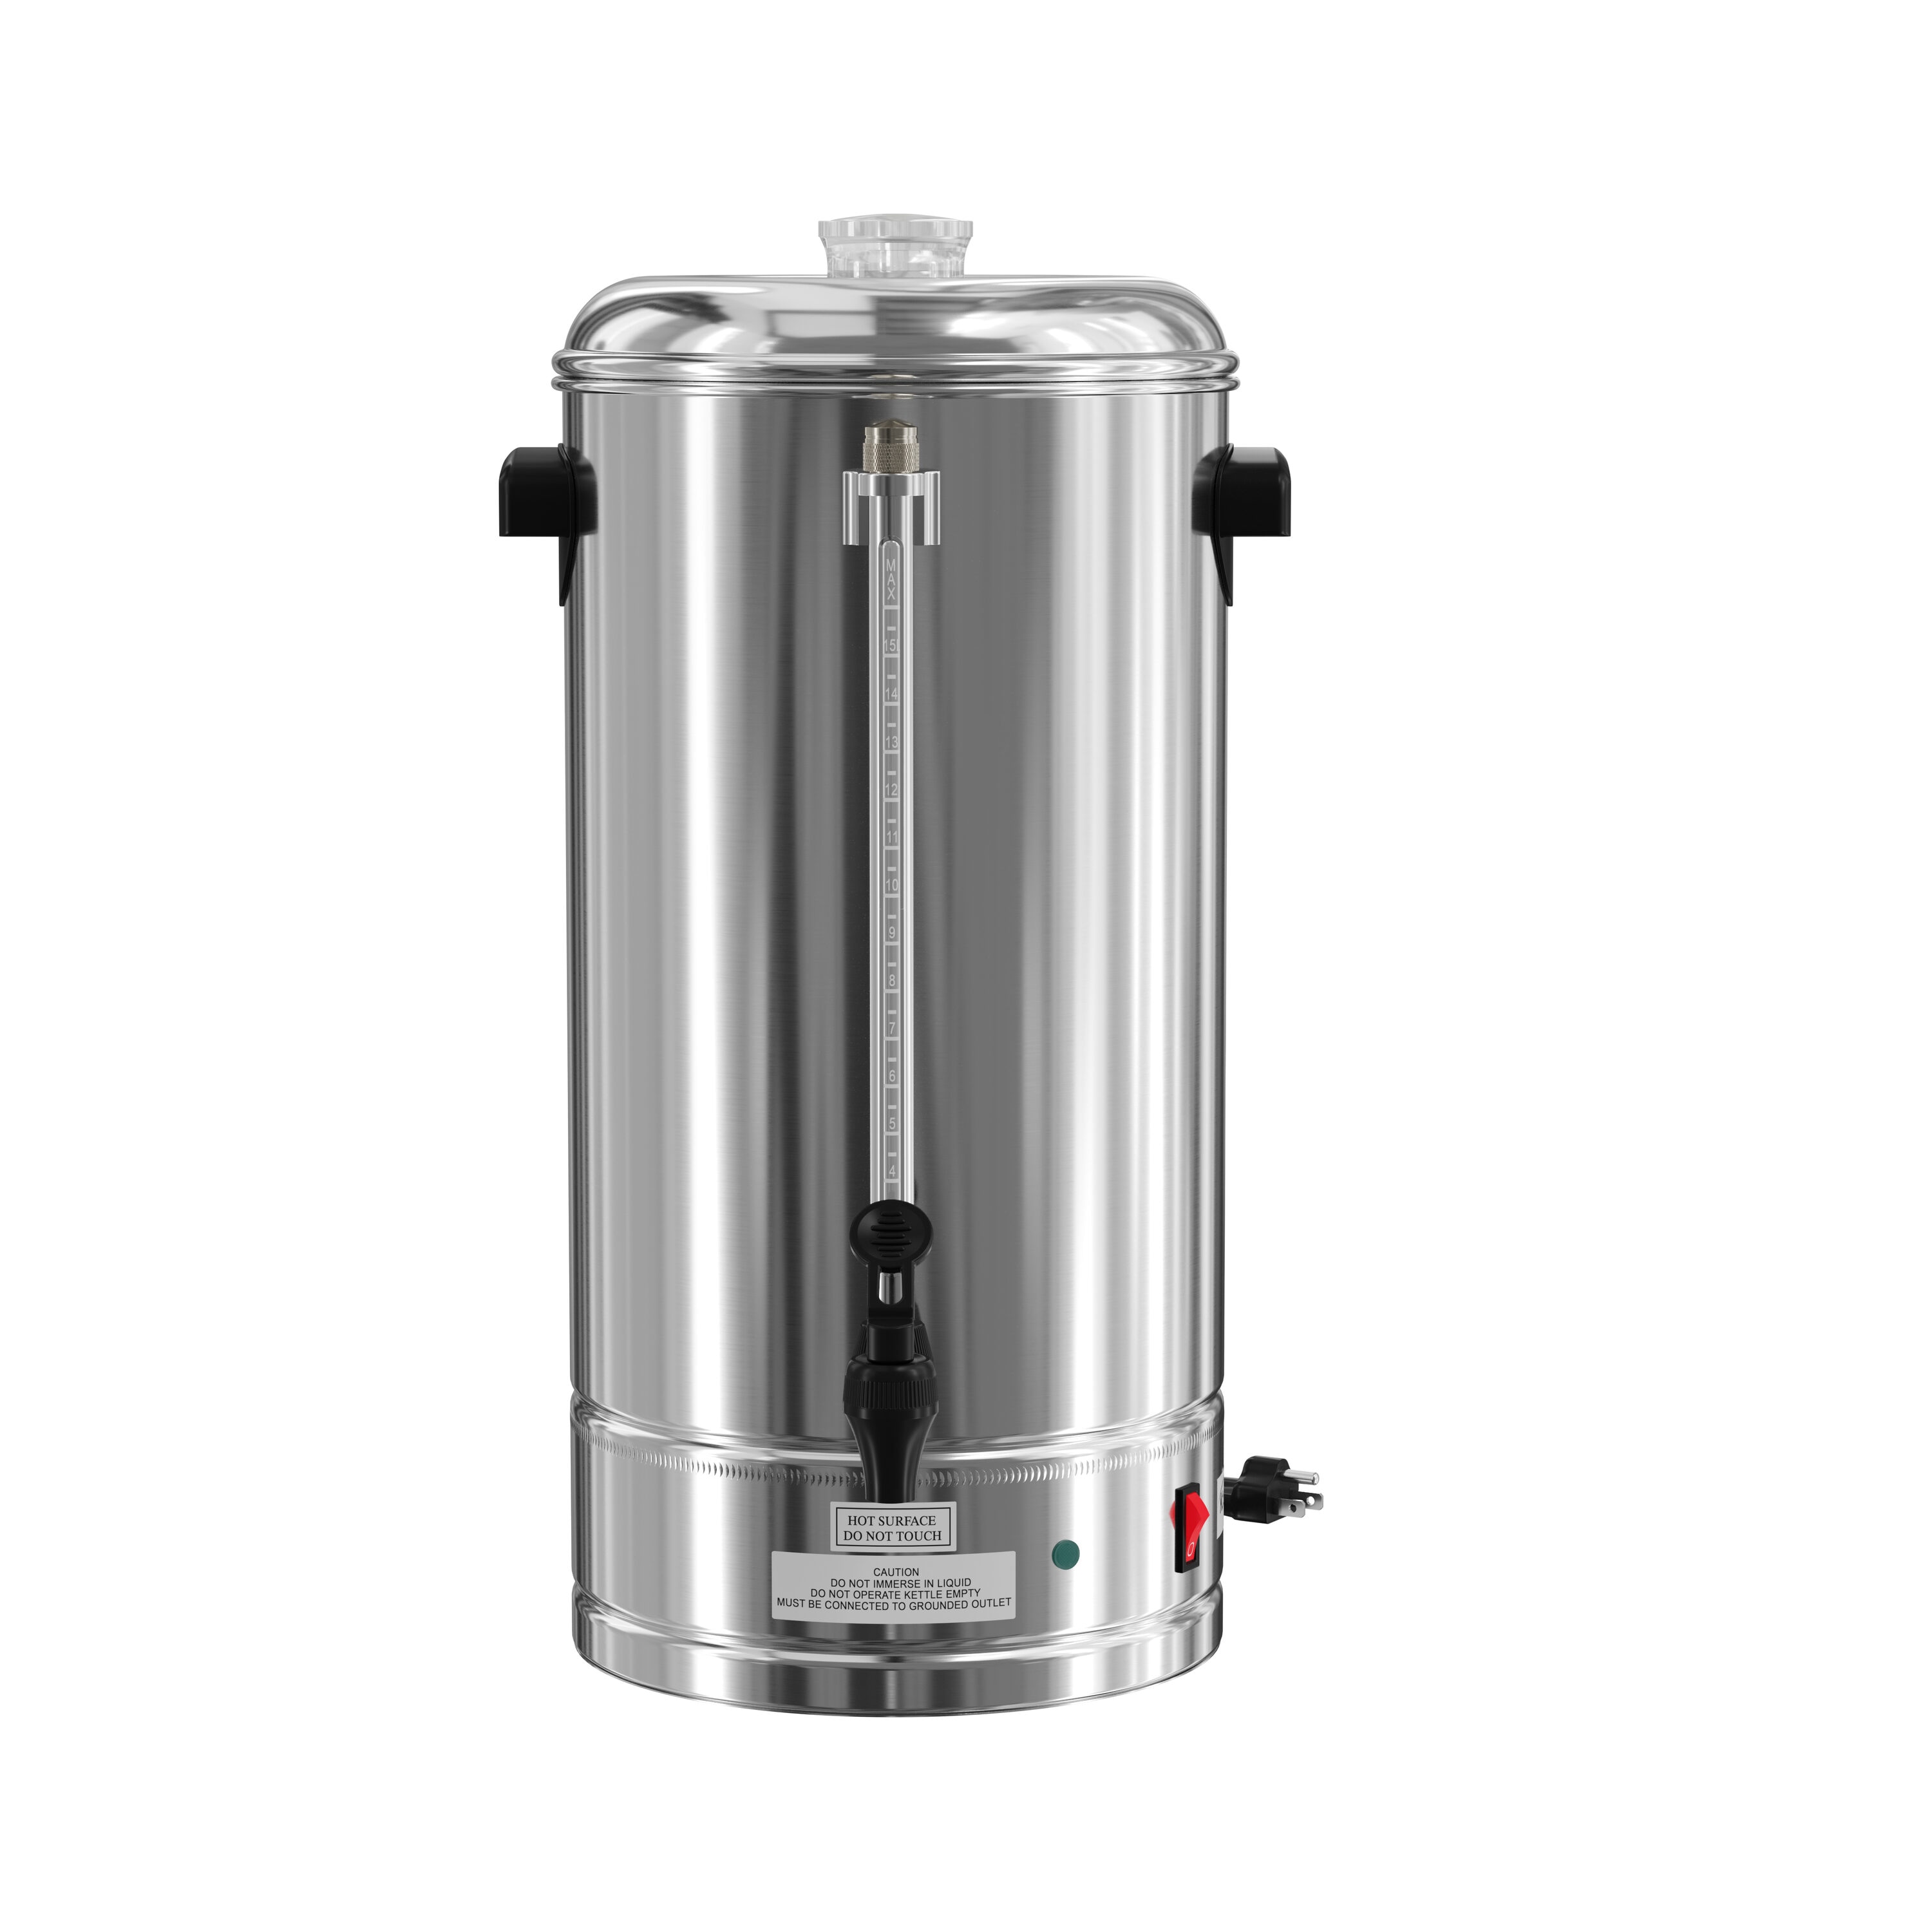 HomeCraft 45-Cup Stainless Steel Residential Coffee Urn in the